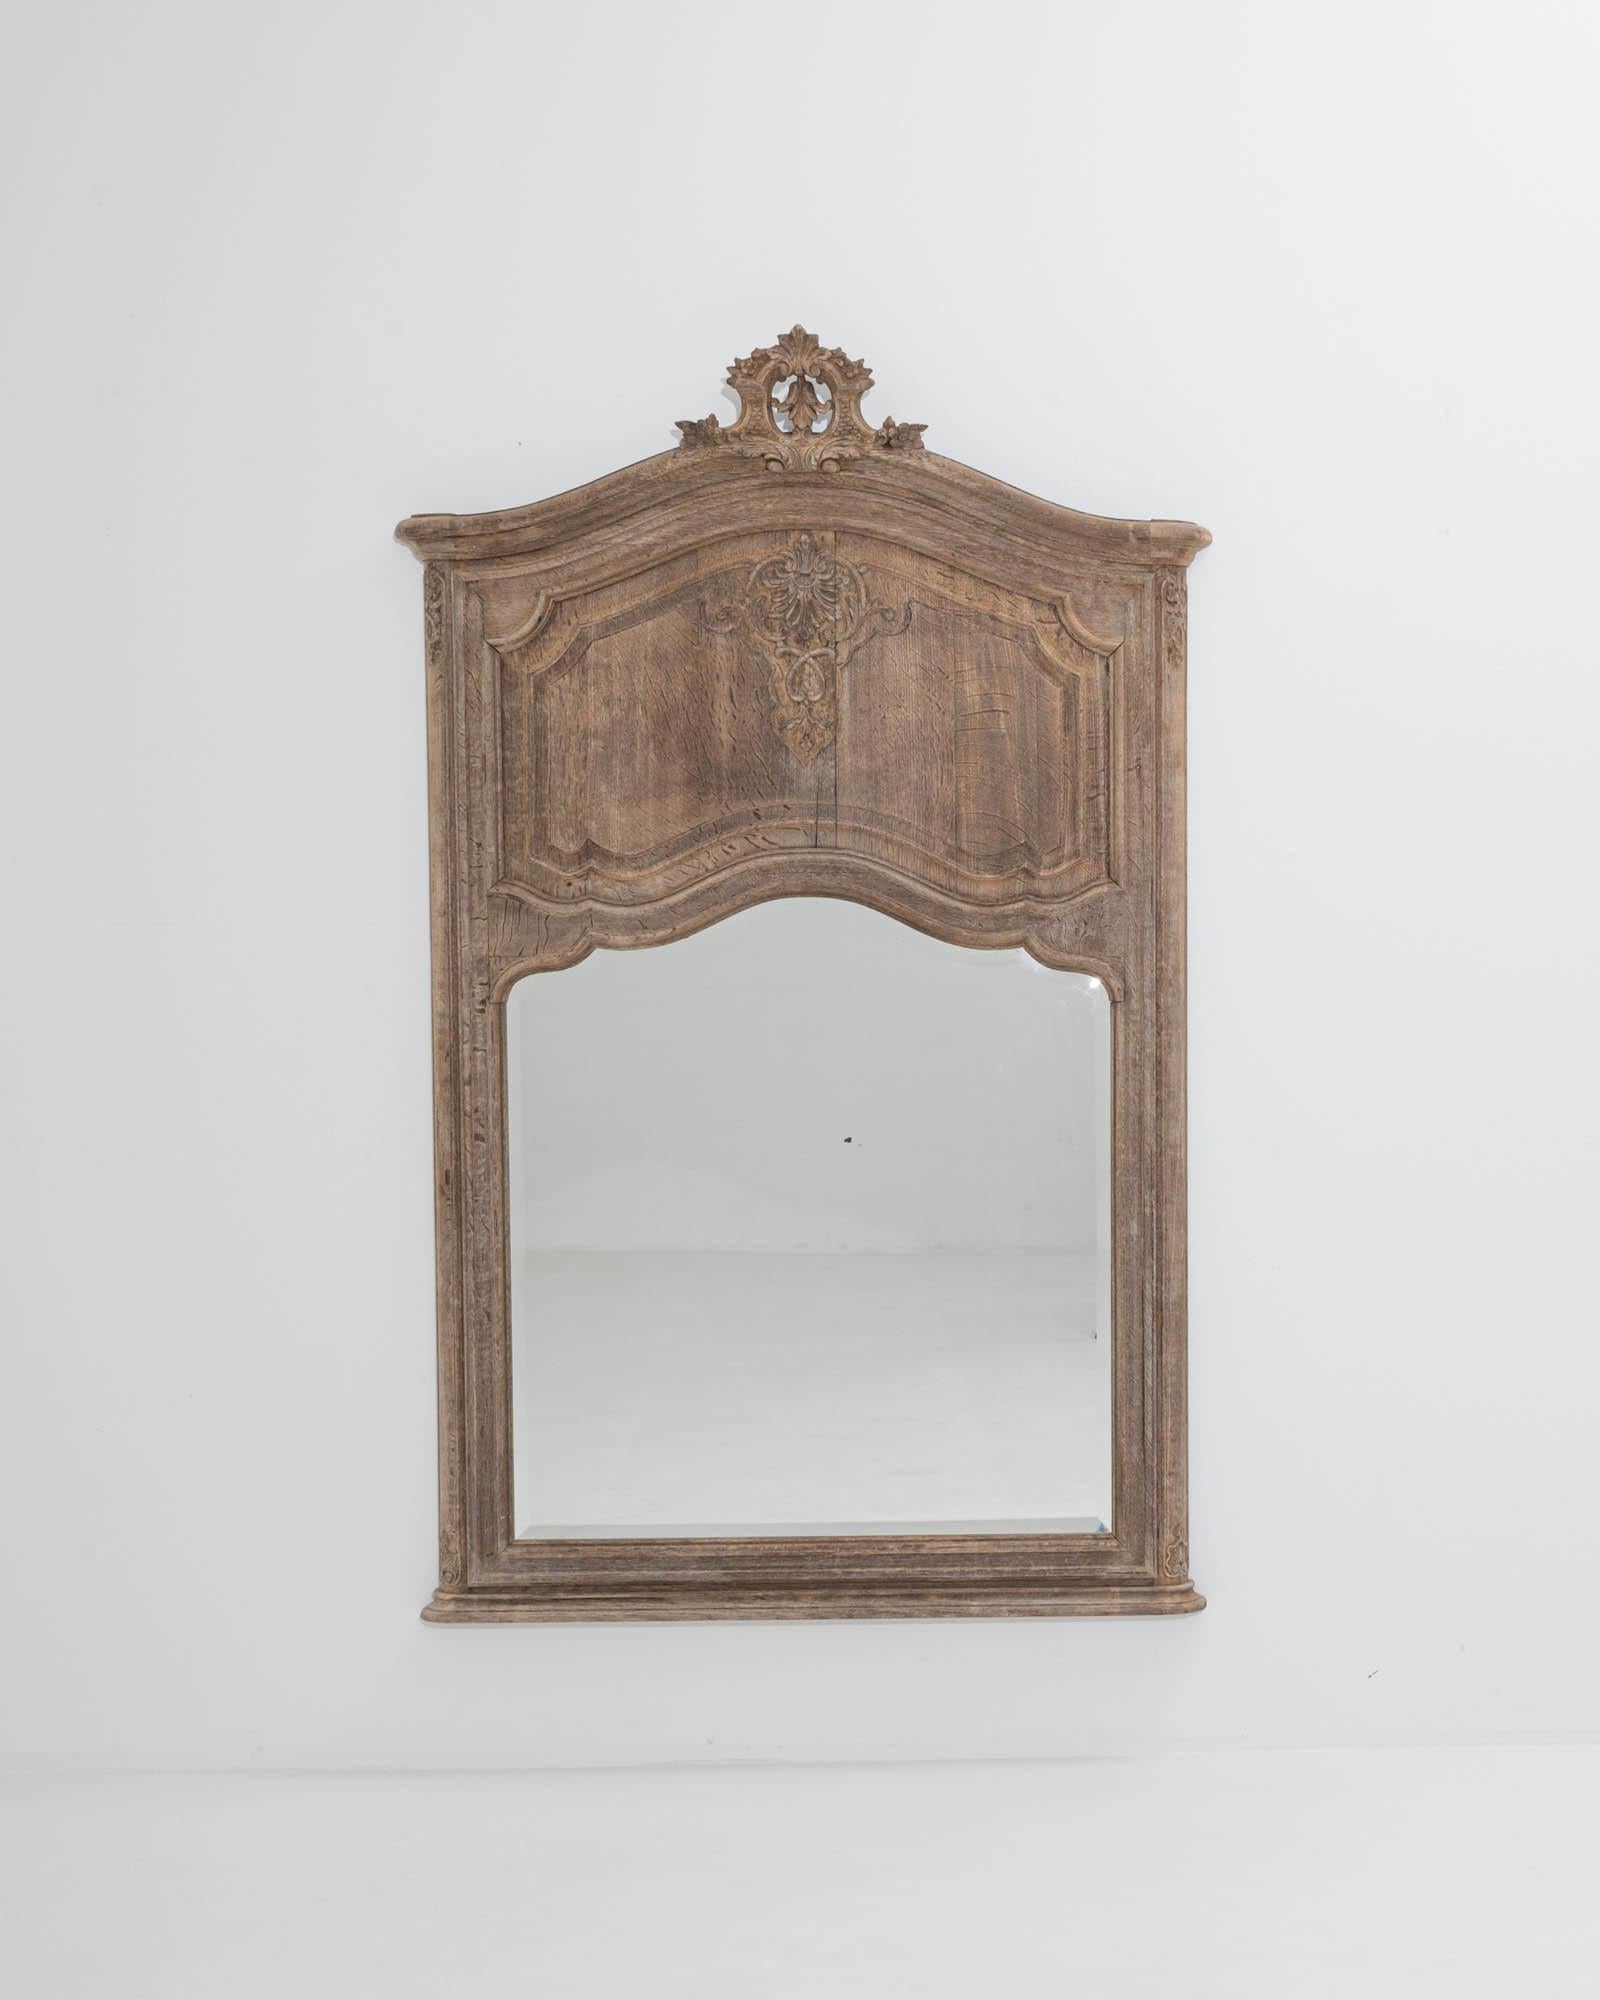 An elegant Baroque shape and intricate carvings give this antique mirror an enchanting personality. Made in Belgium in the 1800s, the surface of the oak has been carefully restored in our workshops to reveal a mellow natural hue with blush